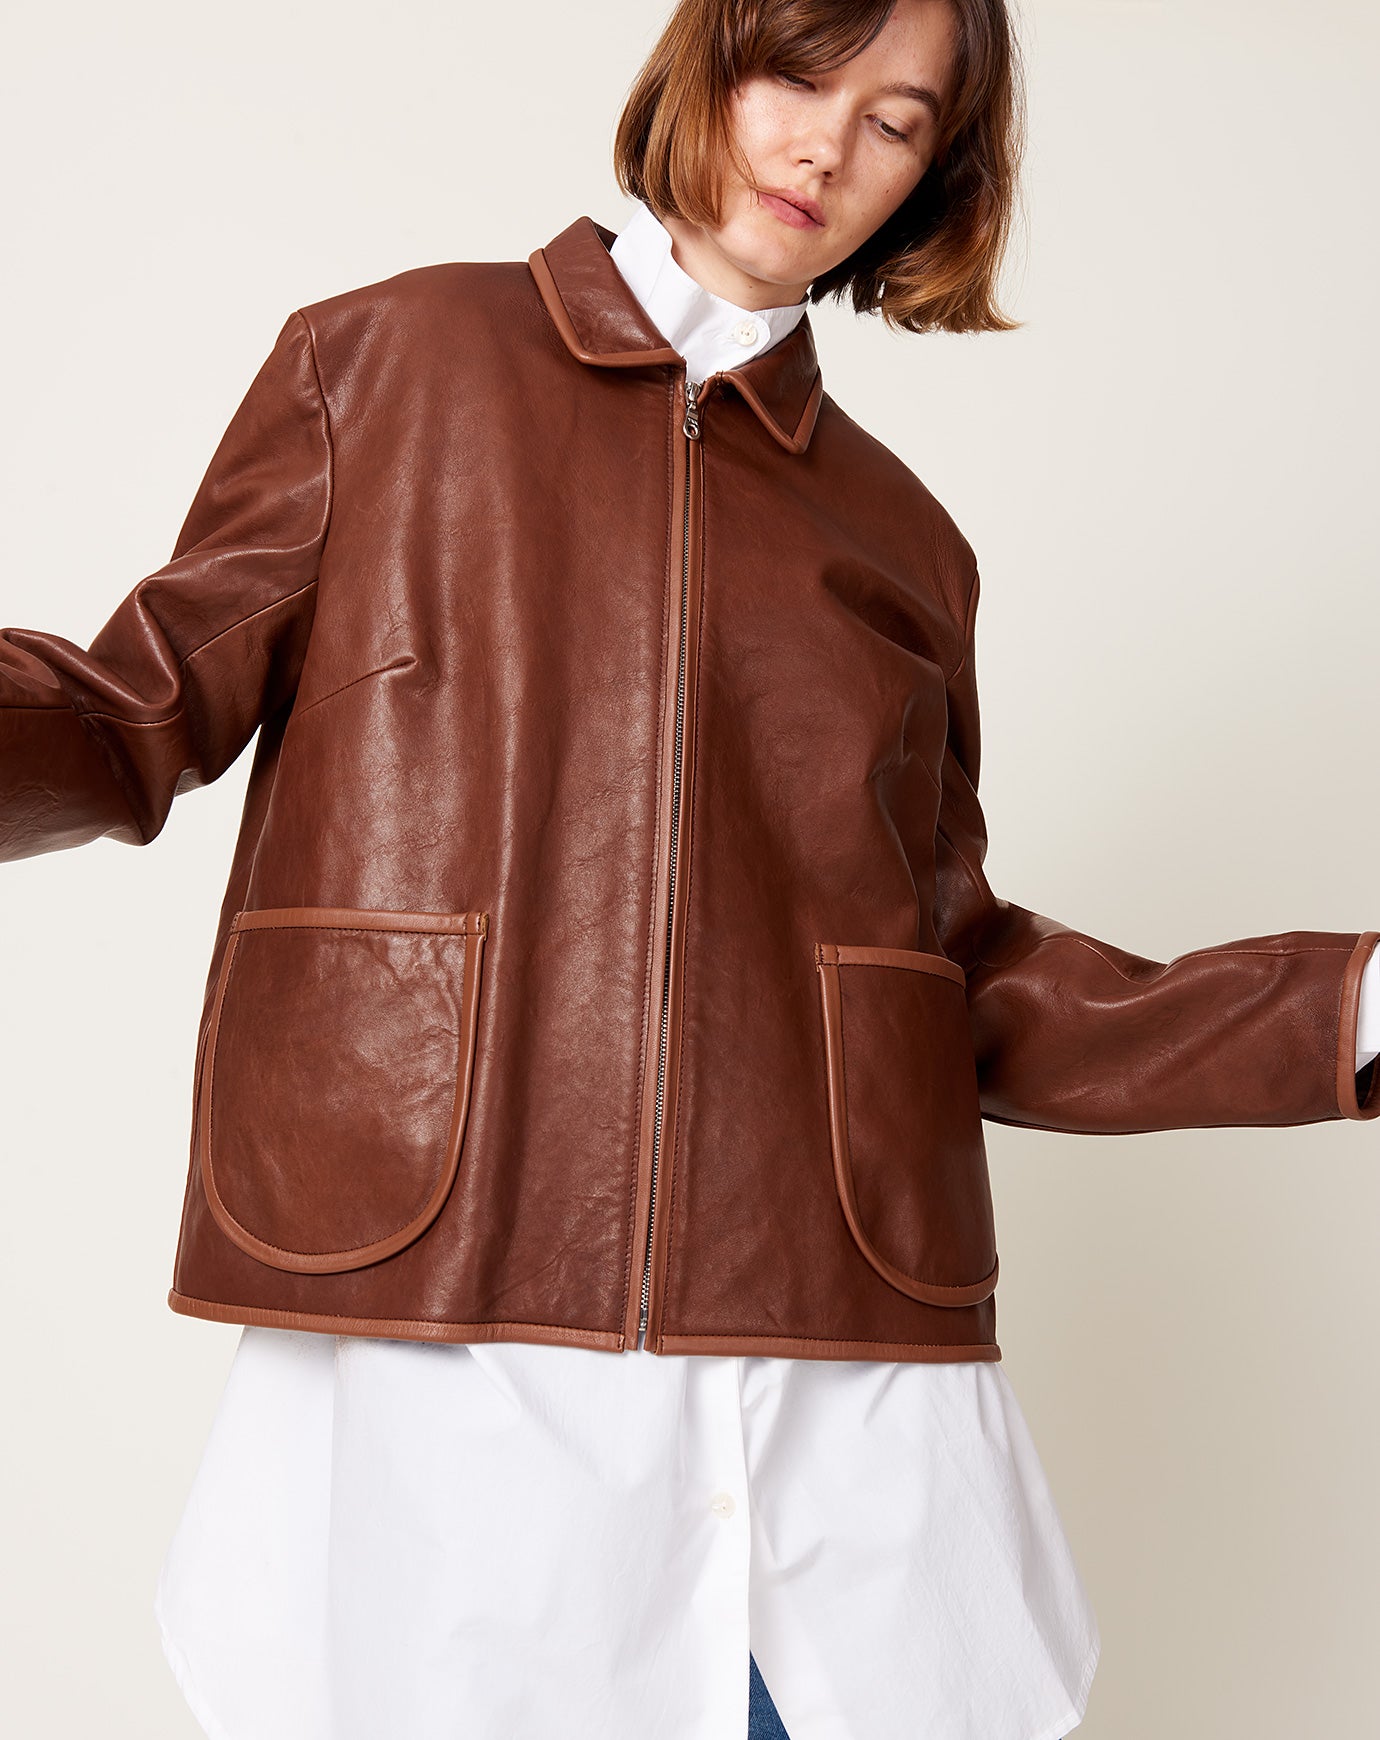 Cawley Leather Zip Lillie Jacket in Light Brown